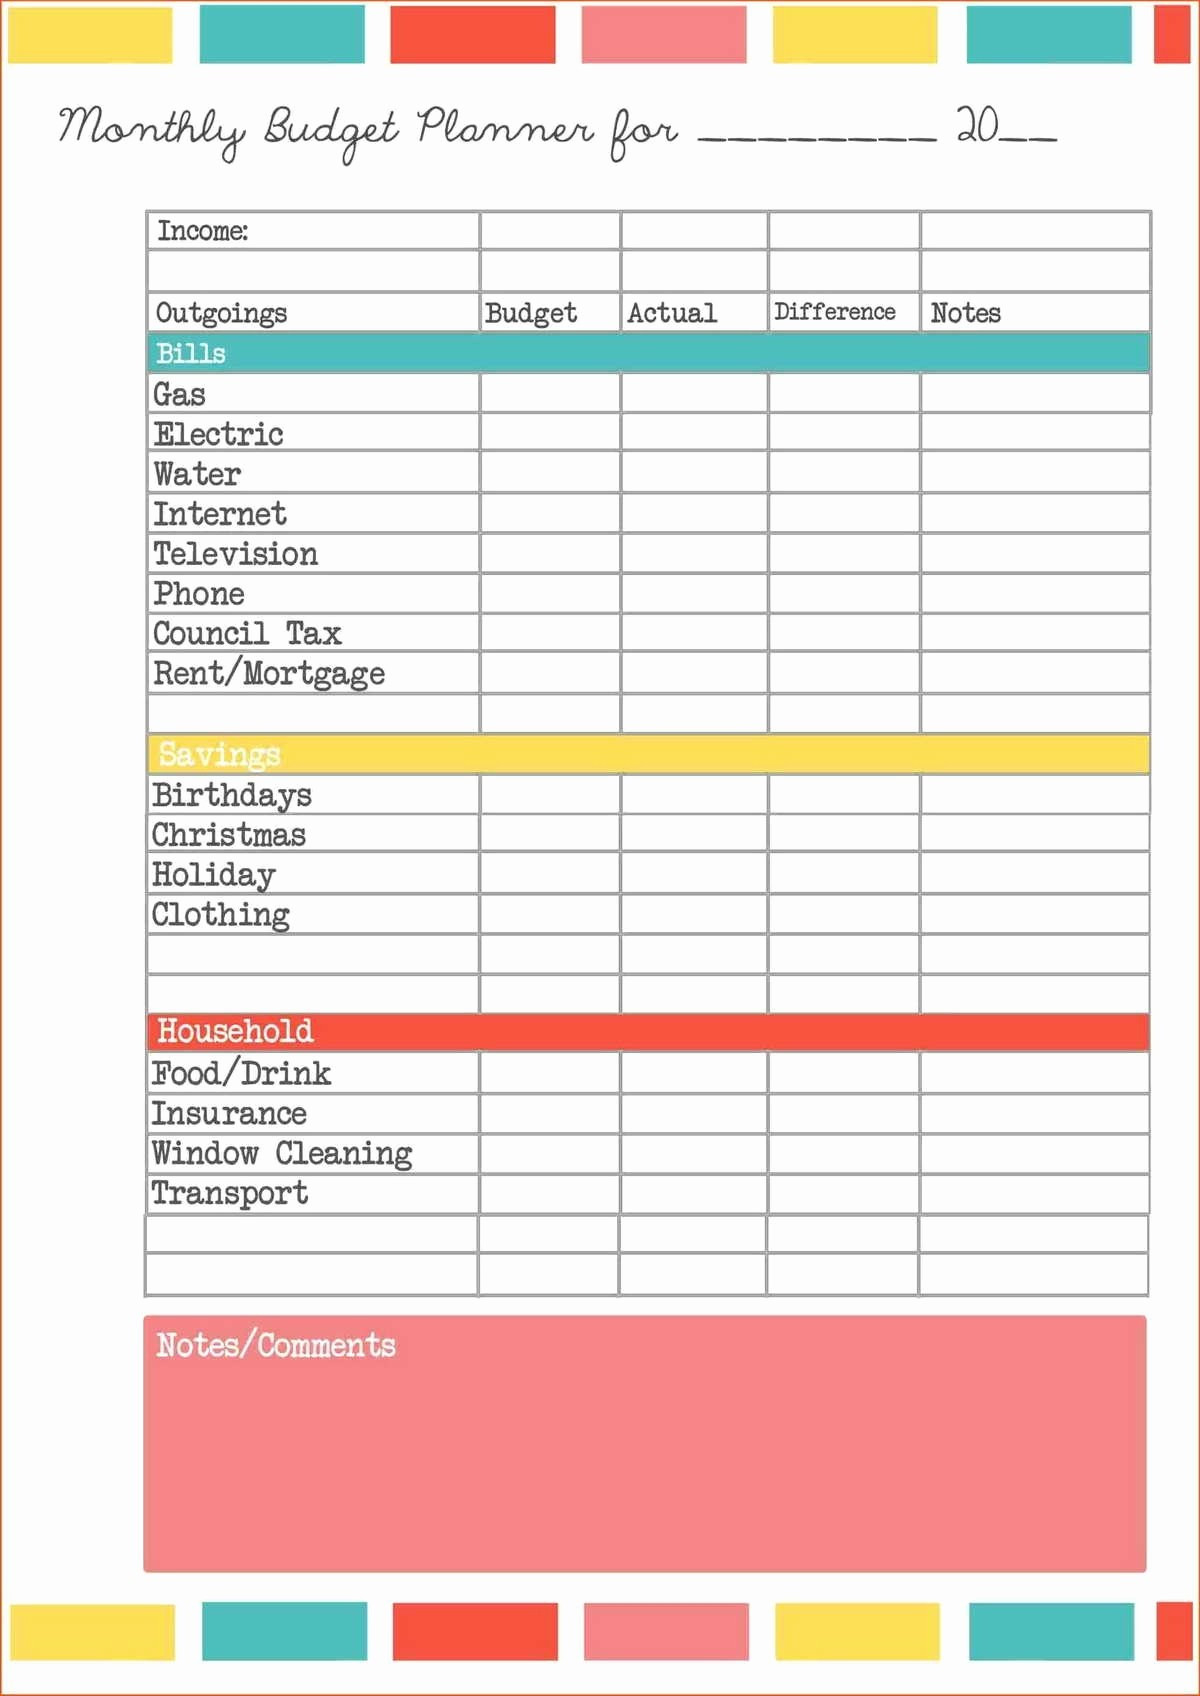 Small Business Expense Sheet Templates